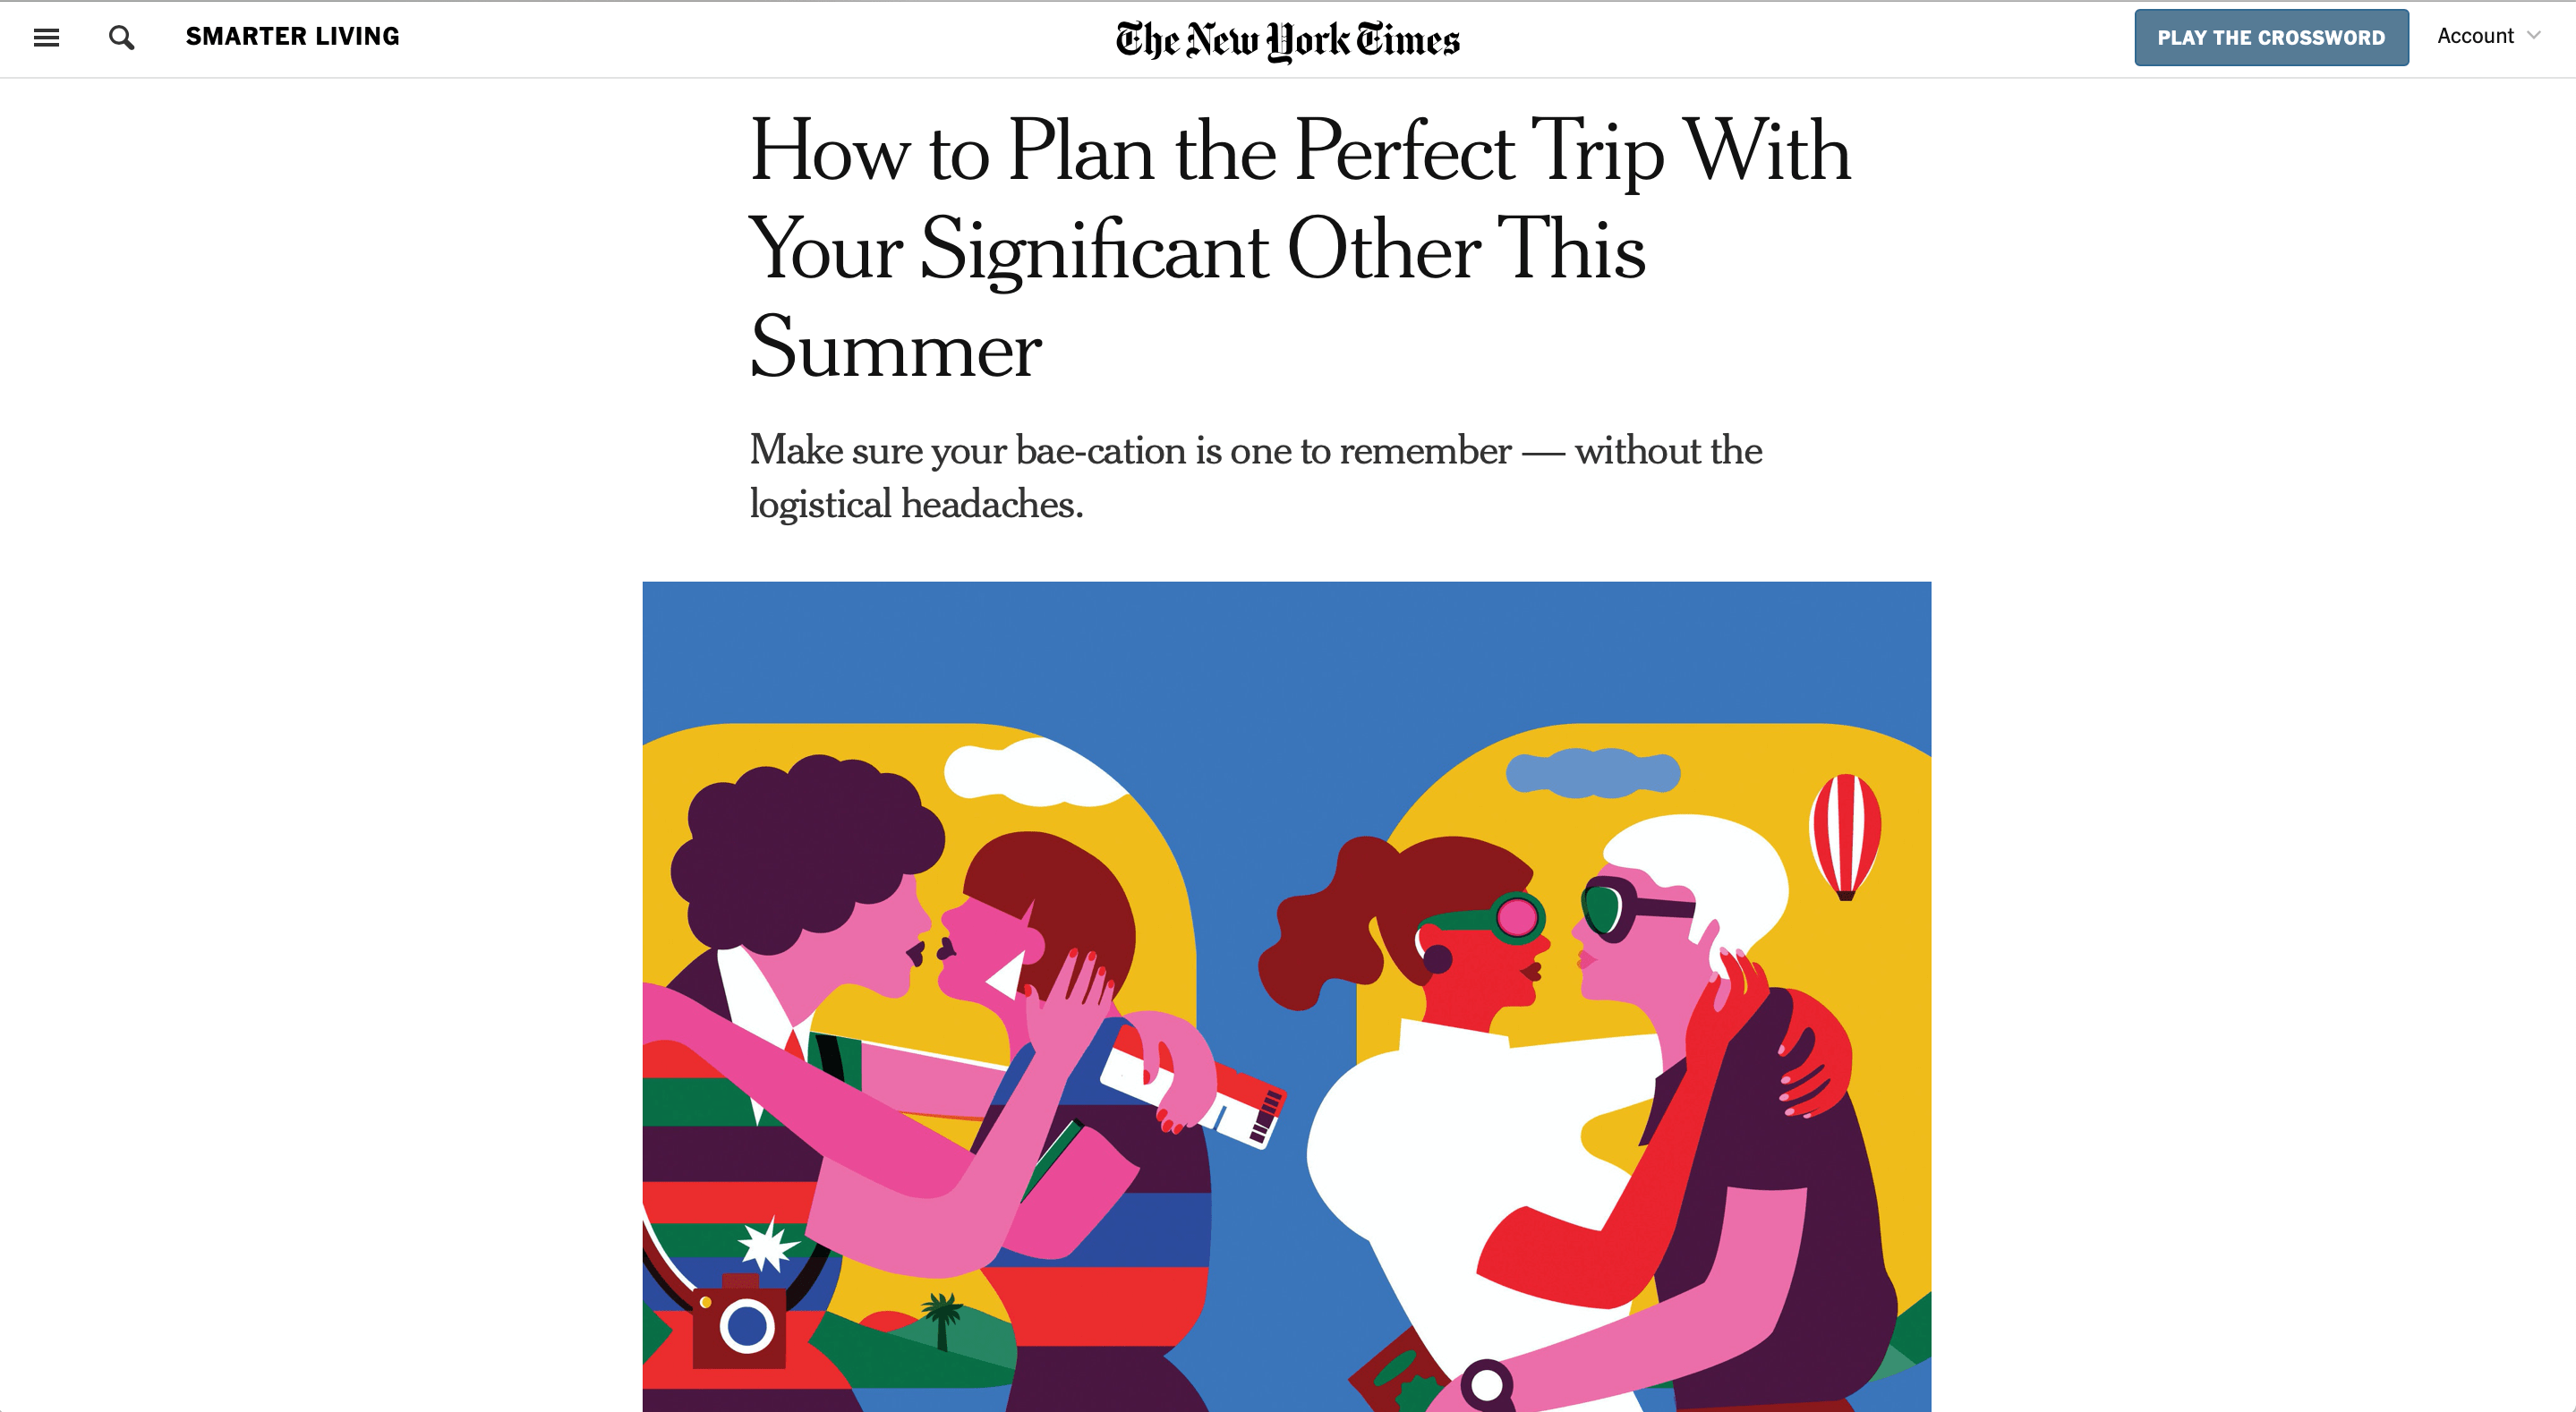 How to Plan the Perfect Trip (NY Times) | LPTG Quote